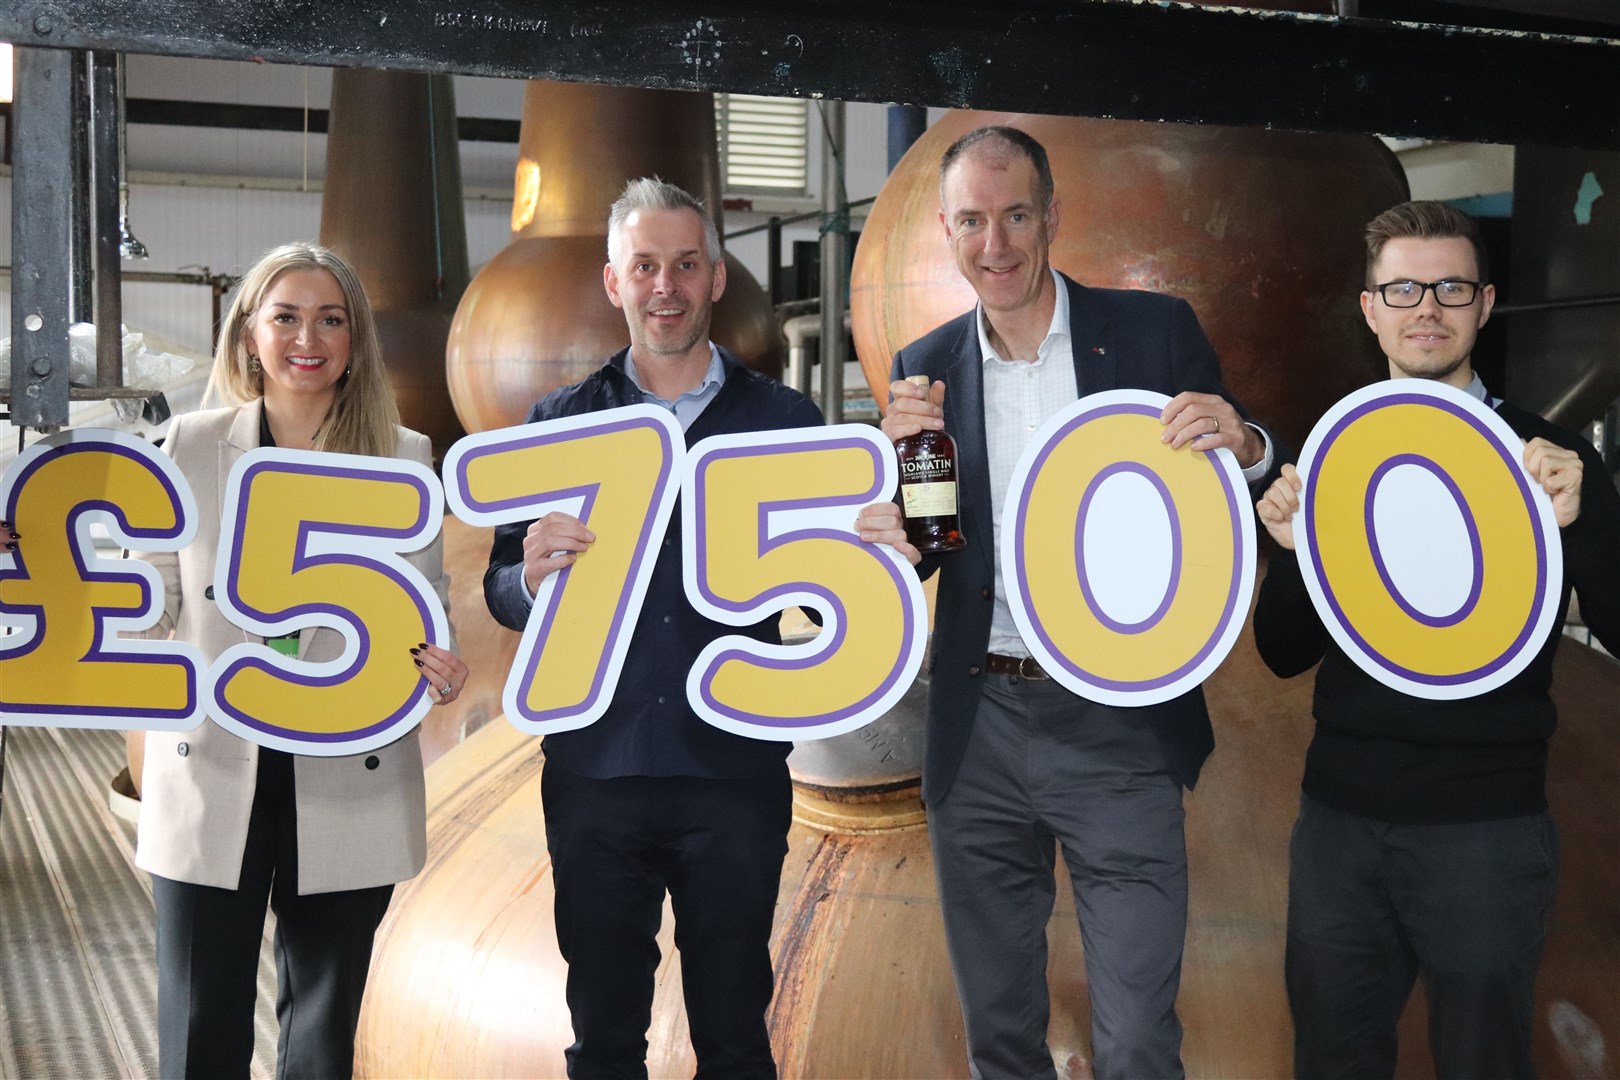 Emma Nicol, community and events fundraiser with Highland Hospice; Stephen Bremner, managing director of Tomatin Distillery; Kenny Steele, chief executive of Highland Hospice and Niall Ross, communications officer with Highland Hospice.